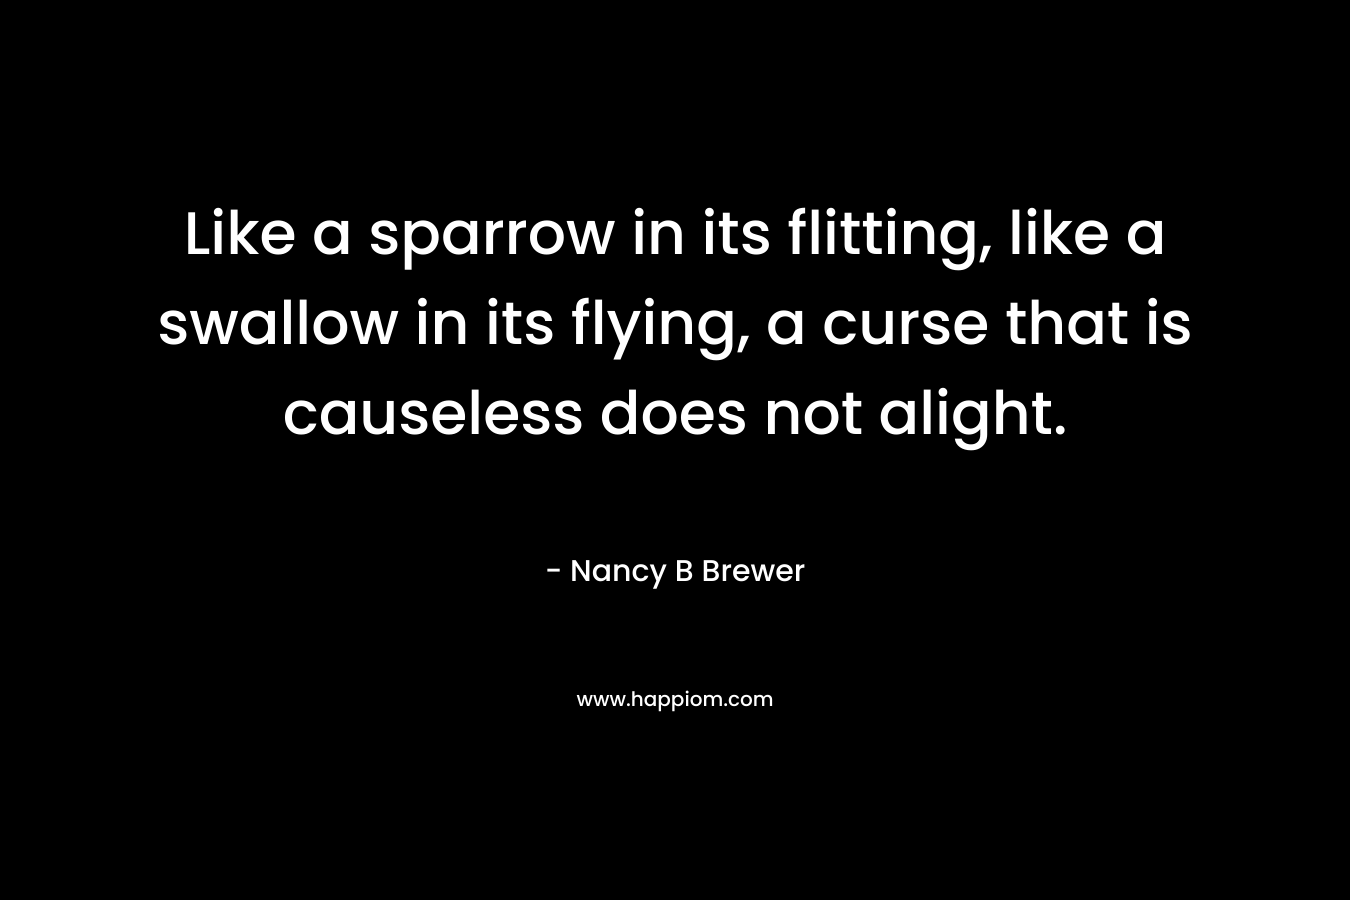 Like a sparrow in its flitting, like a swallow in its flying, a curse that is causeless does not alight. – Nancy B Brewer